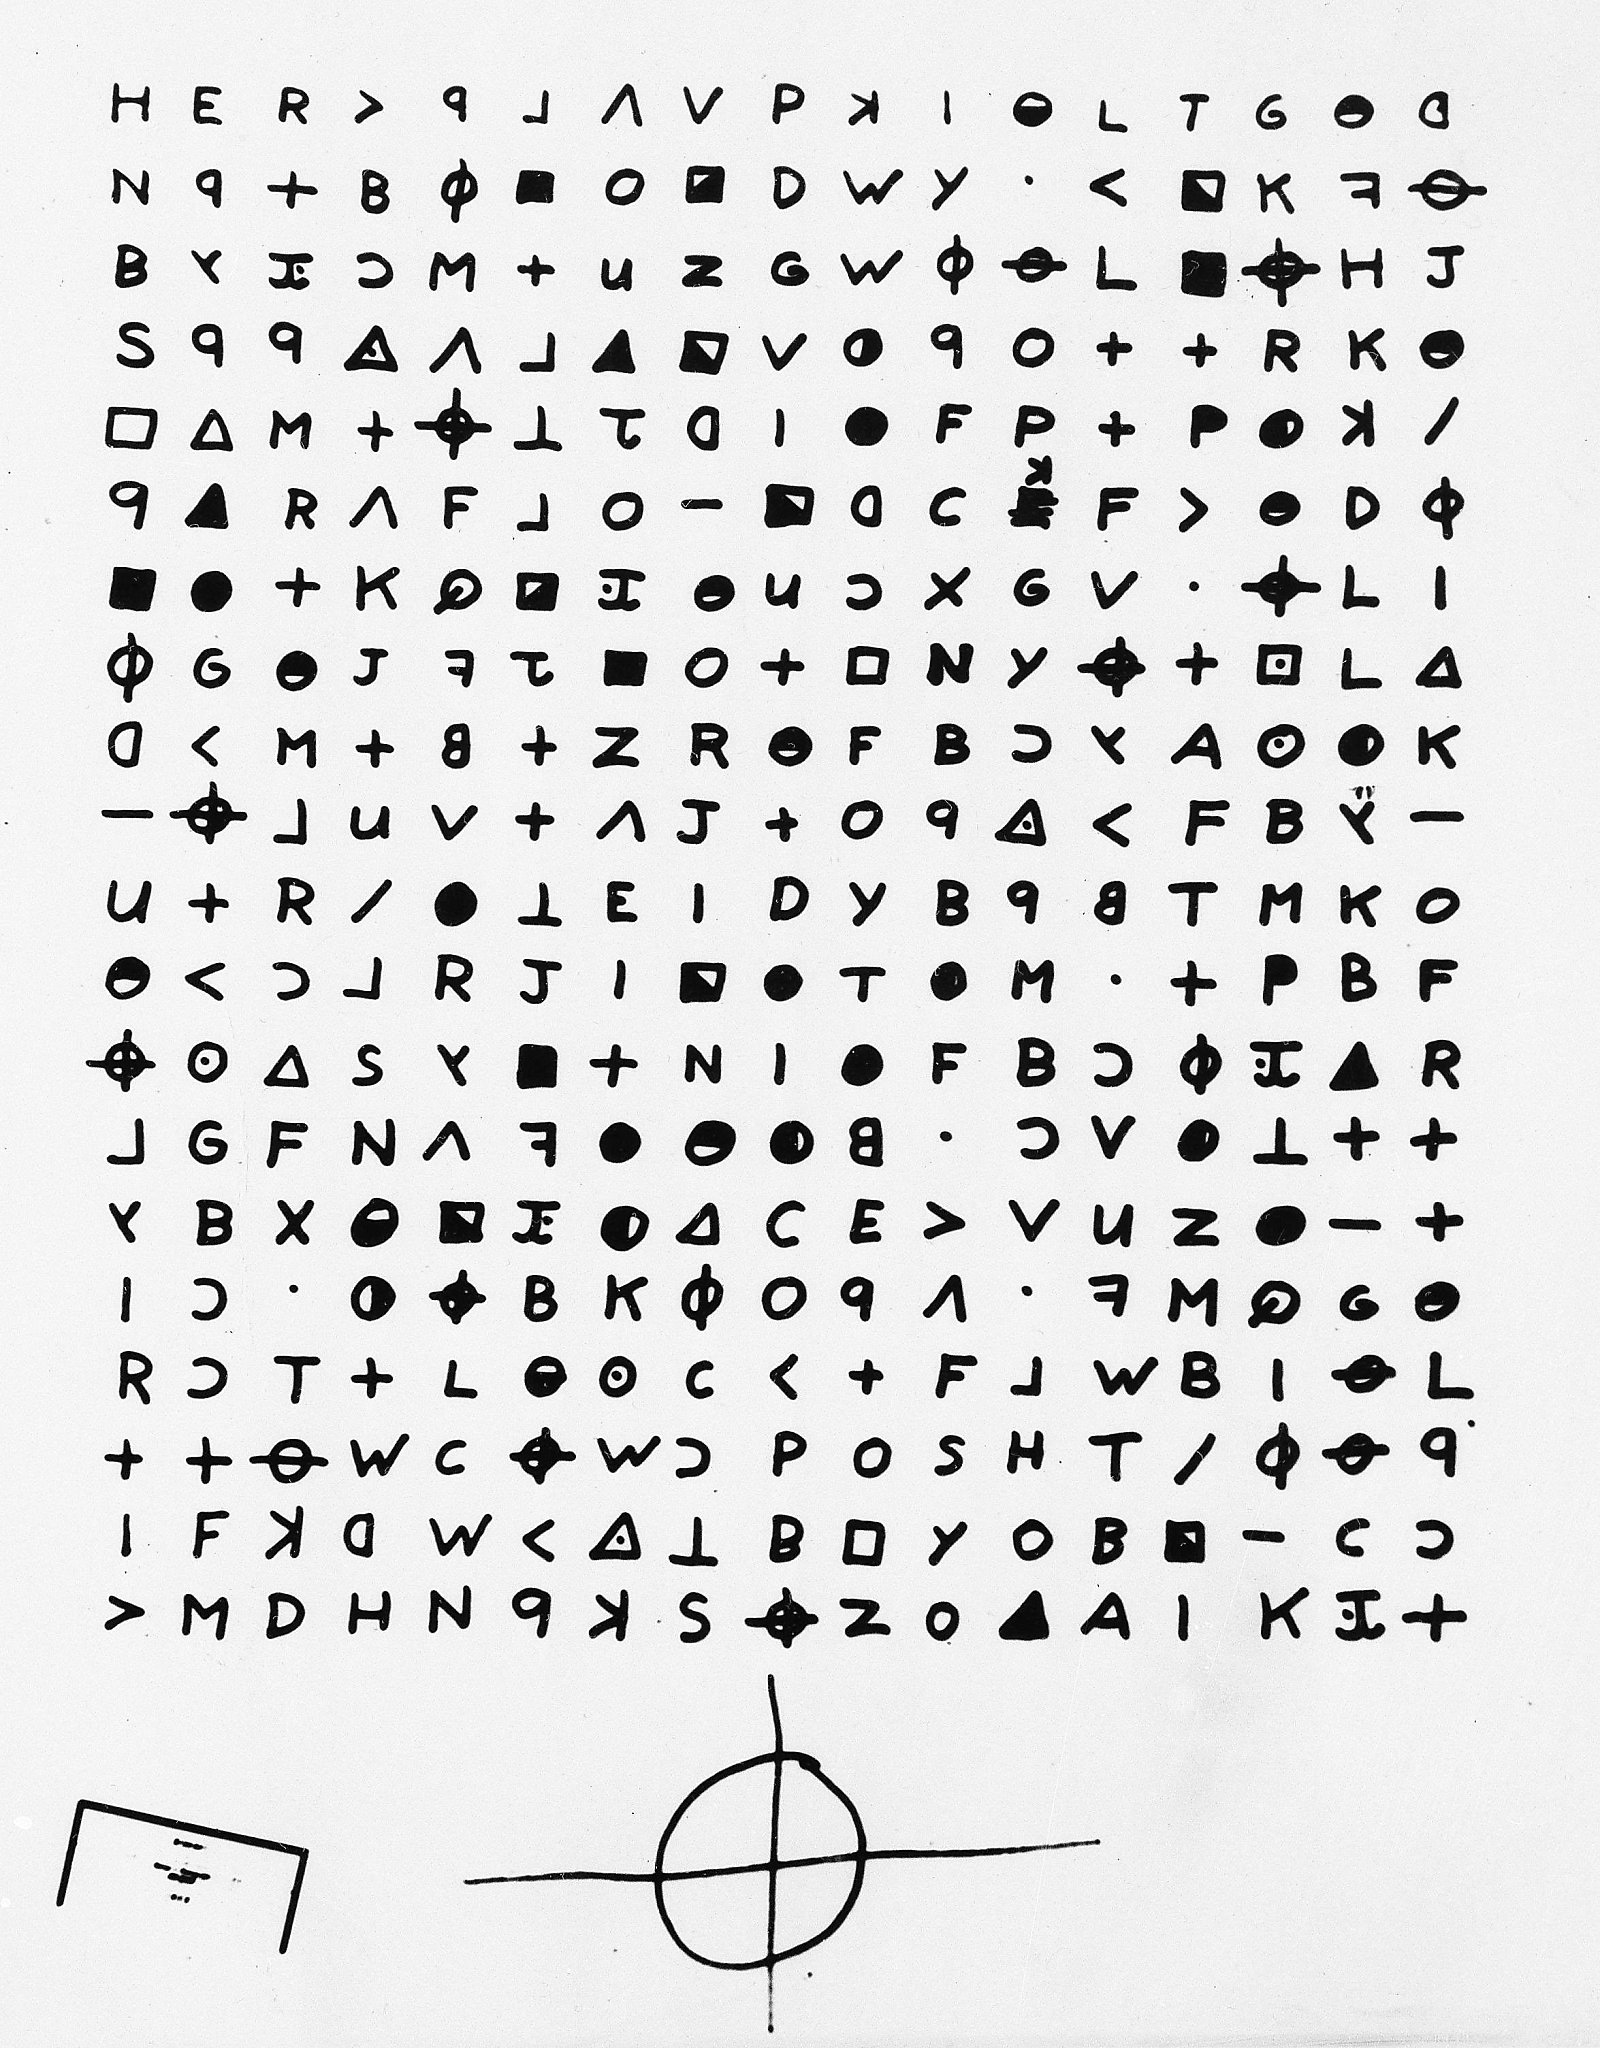 Zodiac killer theories still rolling in after 45 years - SFGate1600 x 2048